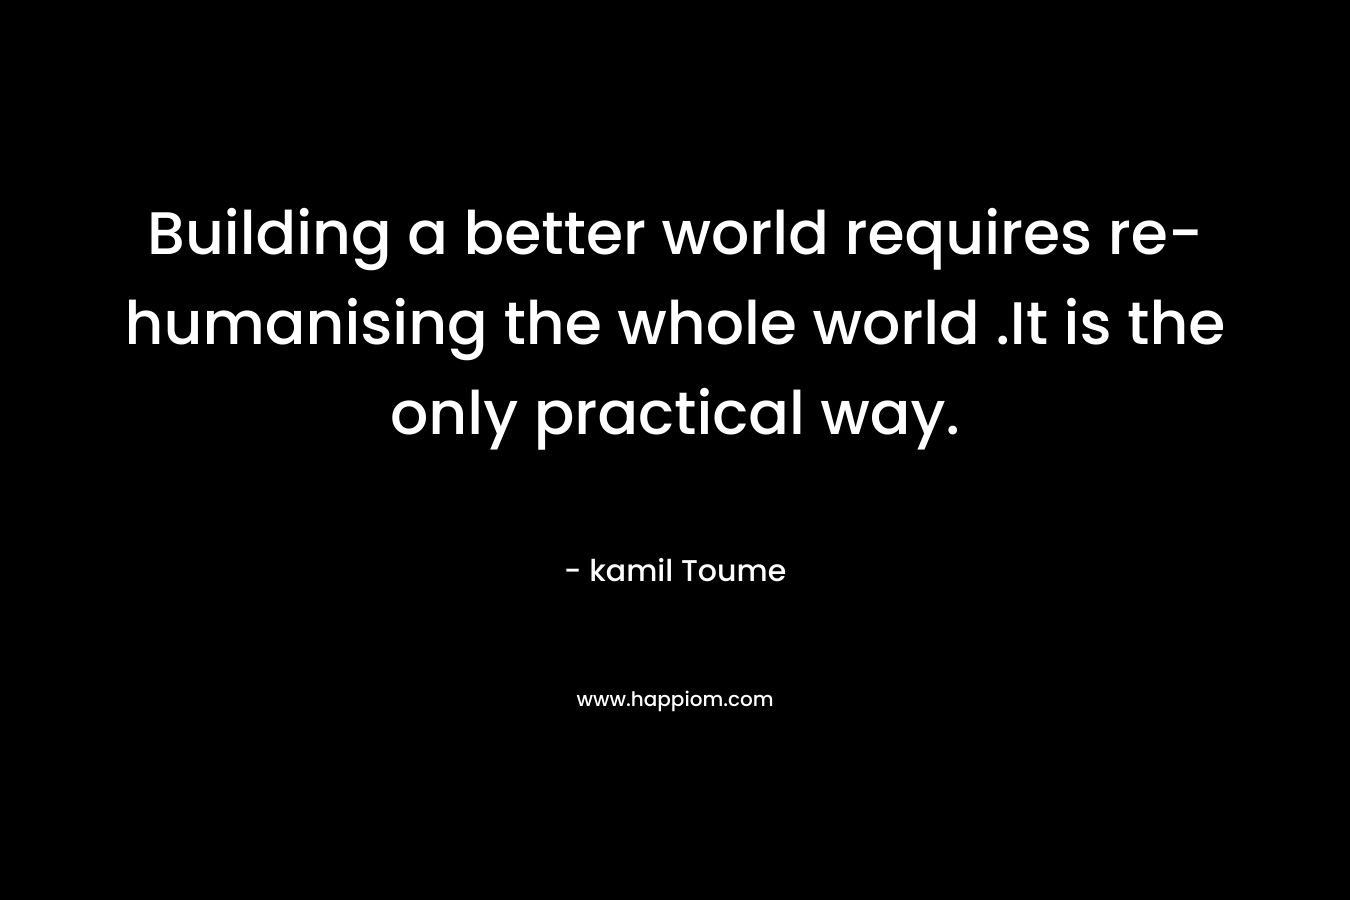 Building a better world requires re-humanising the whole world .It is the only practical way.